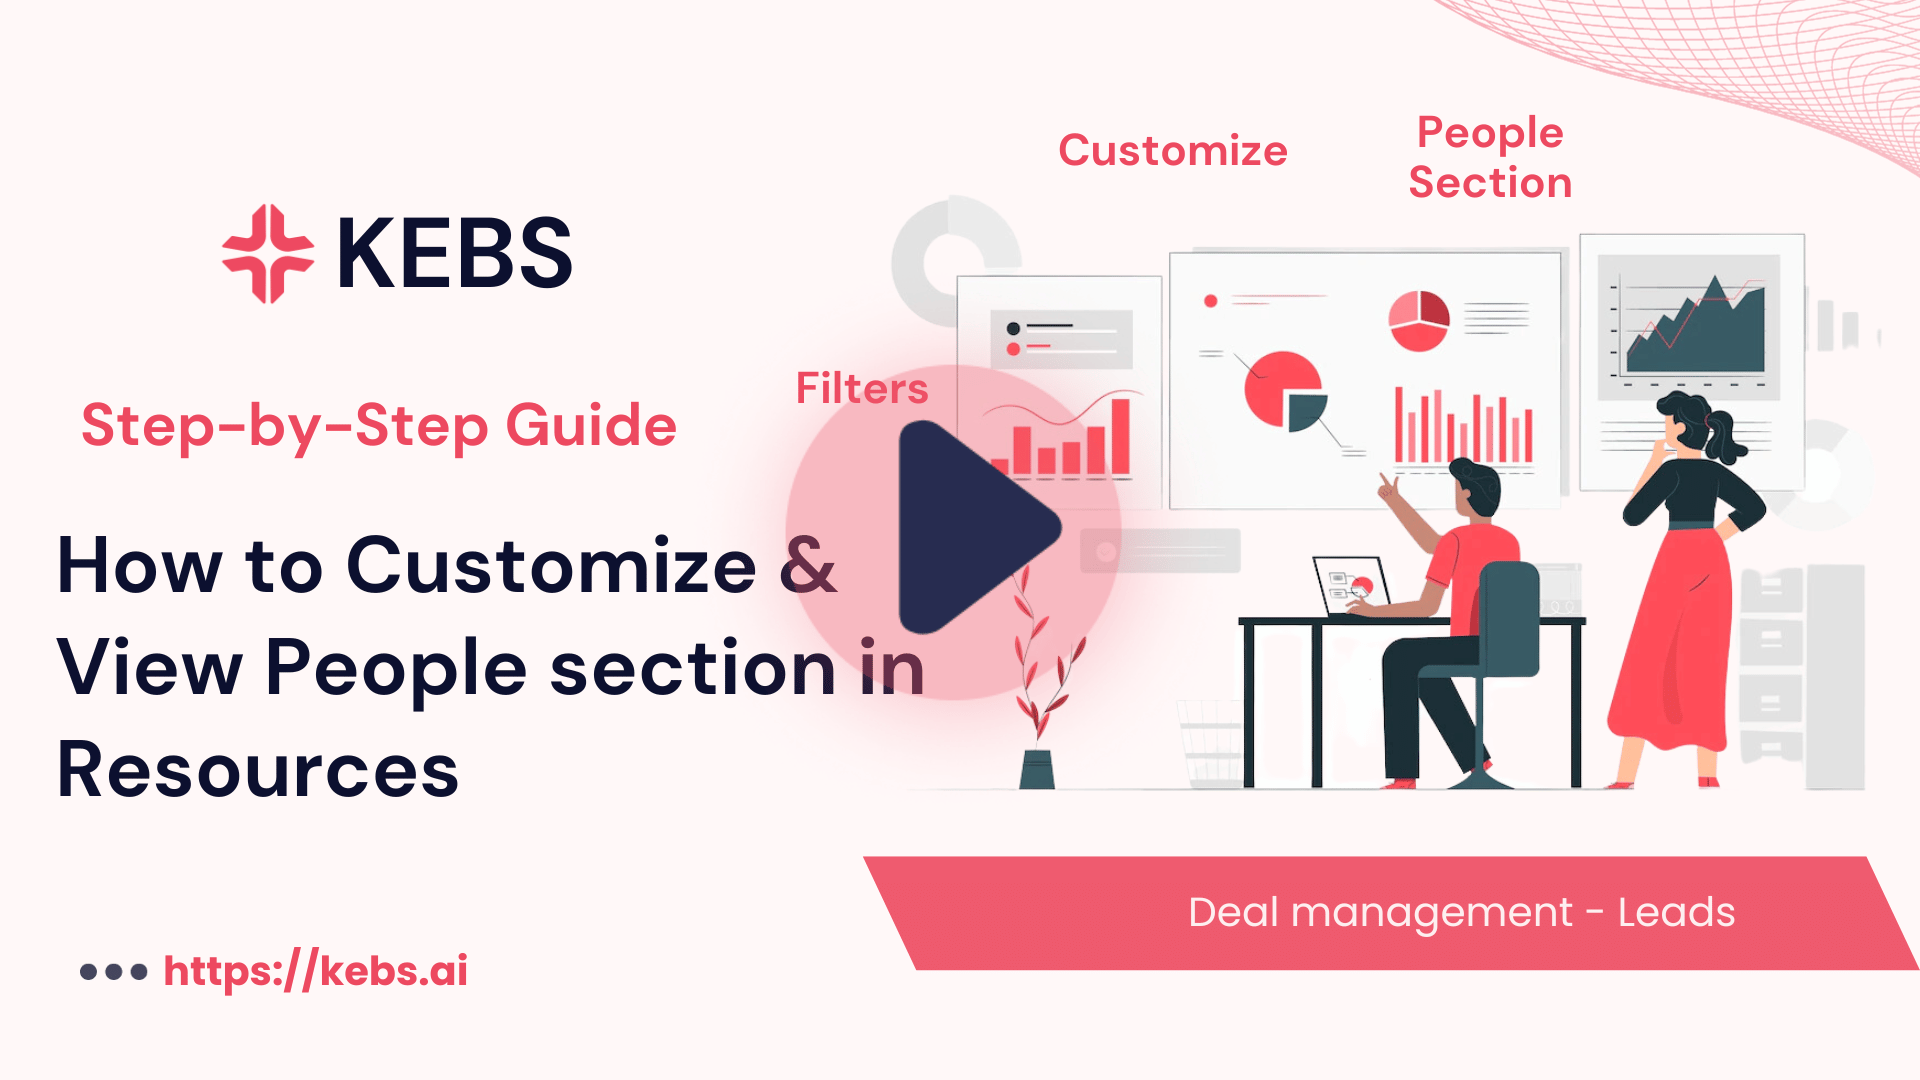 How to Customize & View People section in Resources